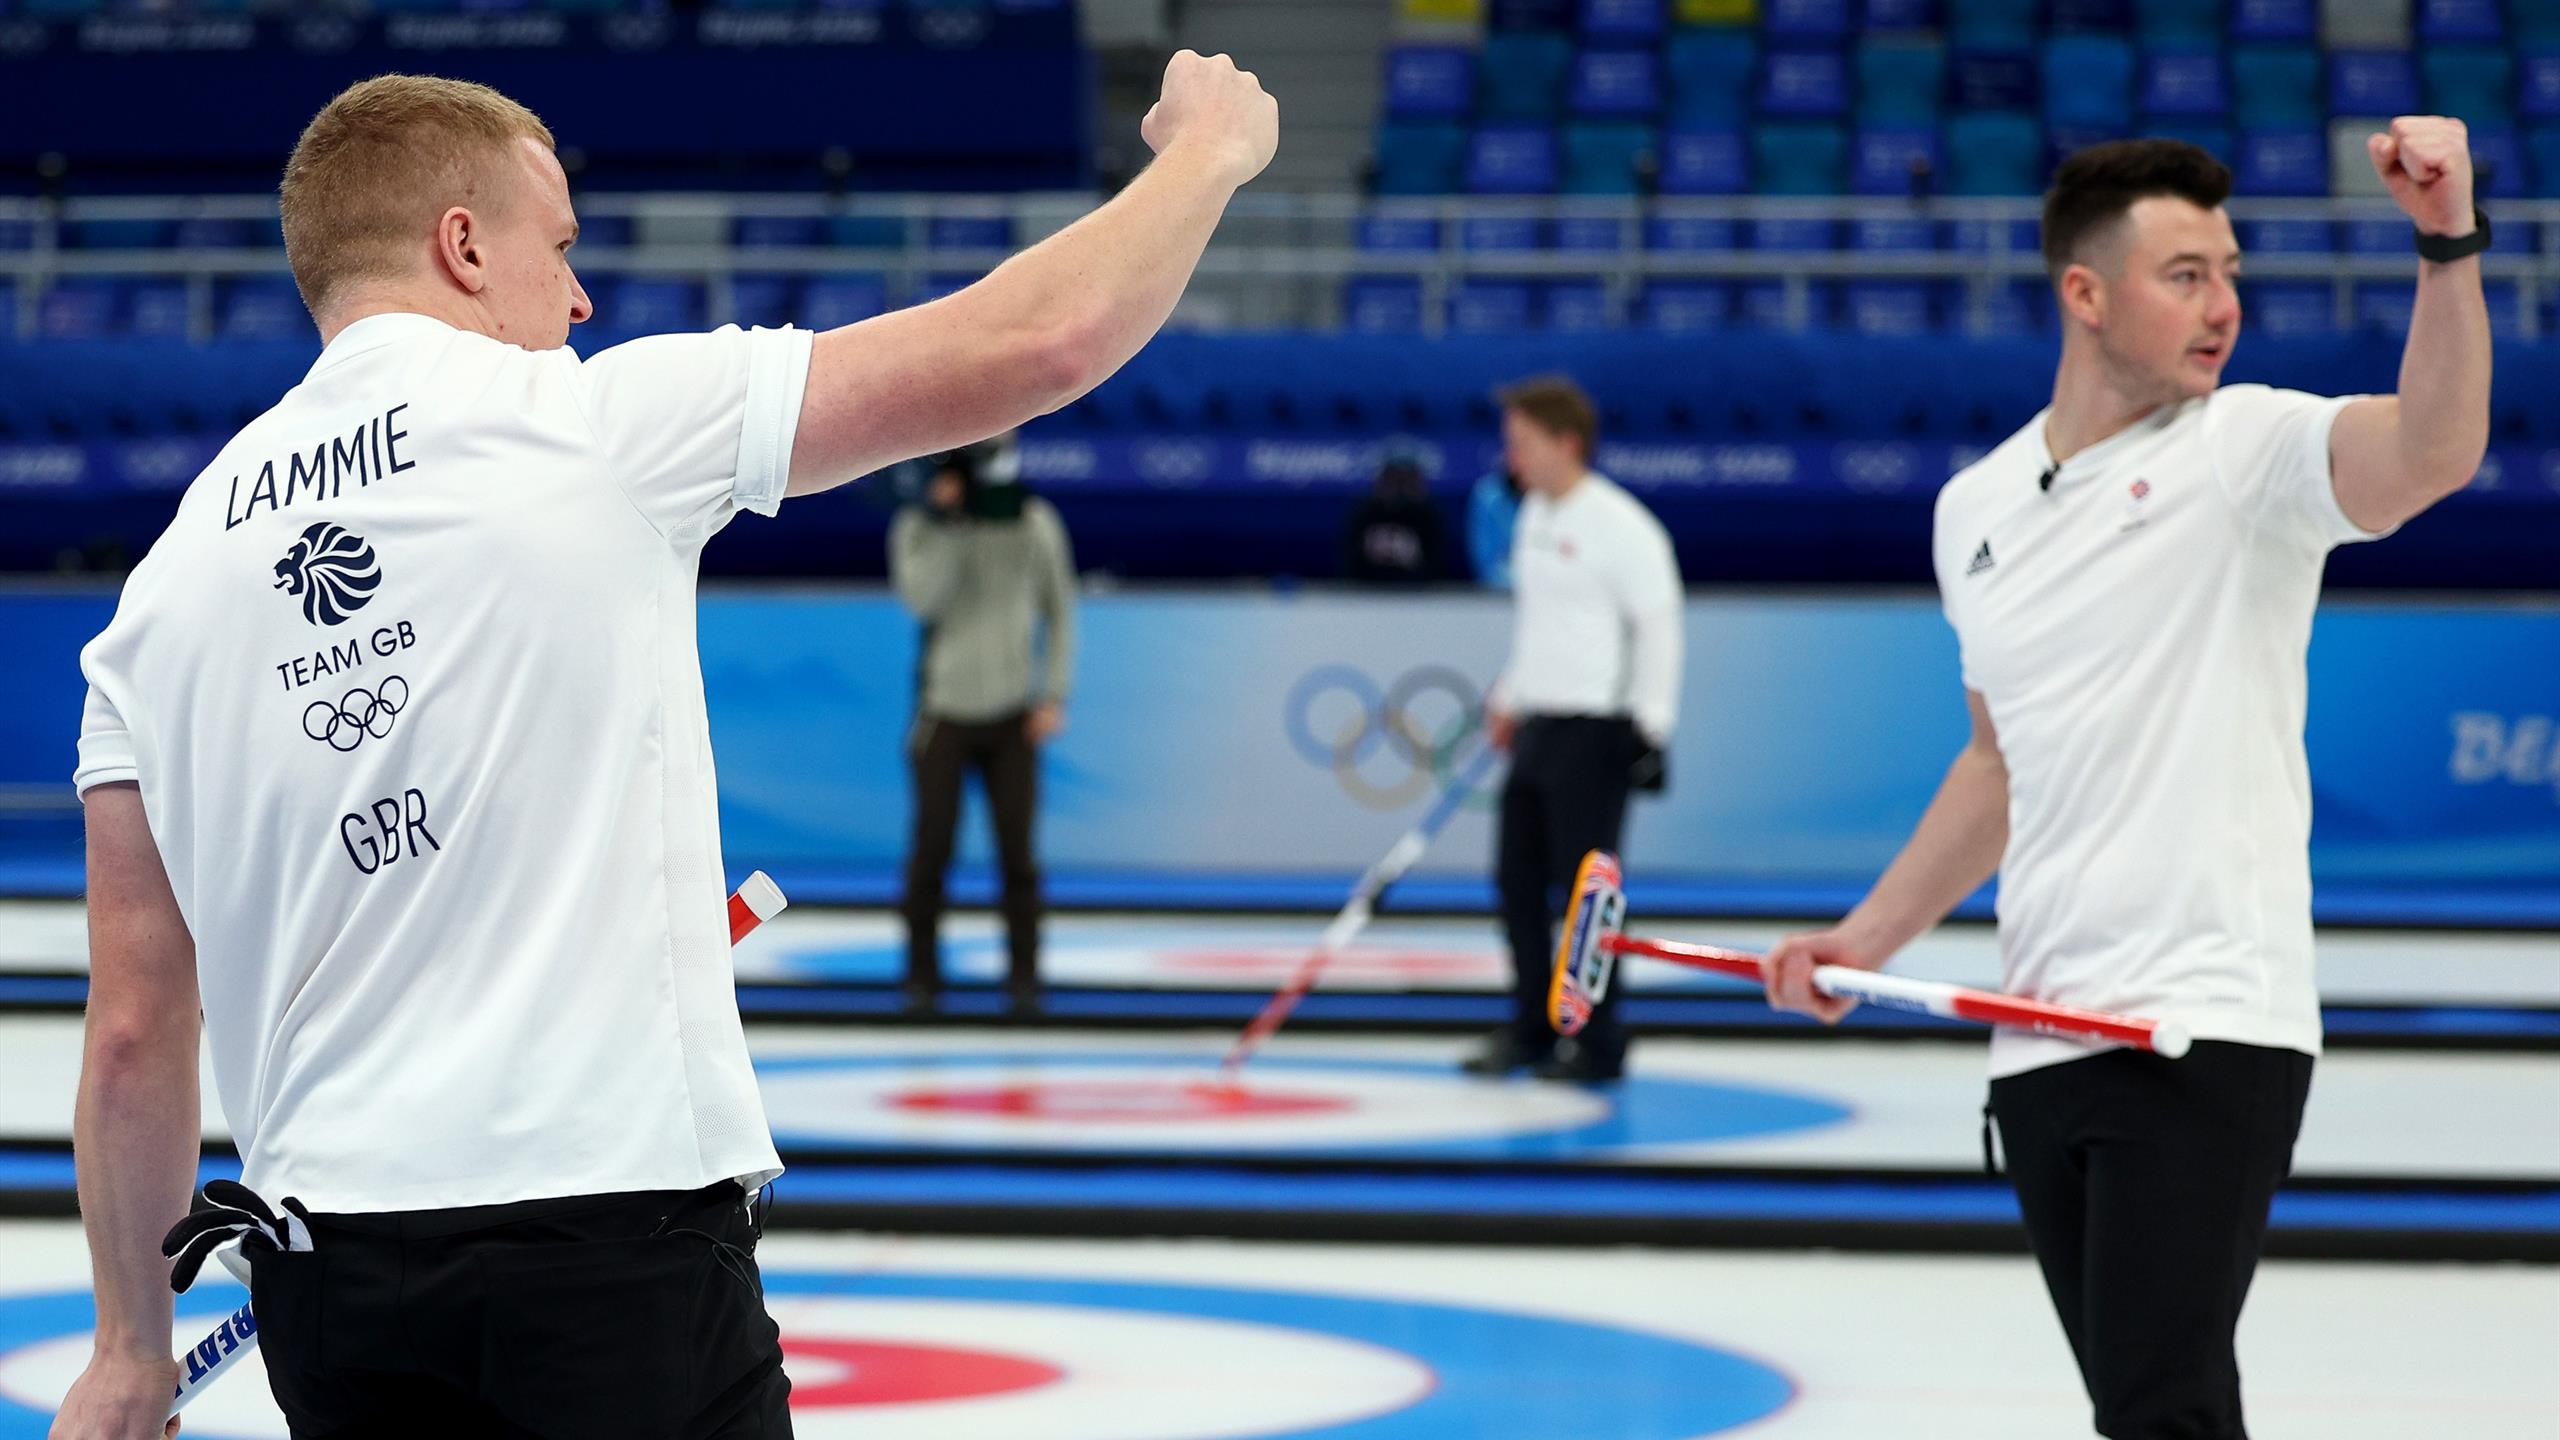 When is the Olympic 2022 mens curling final?